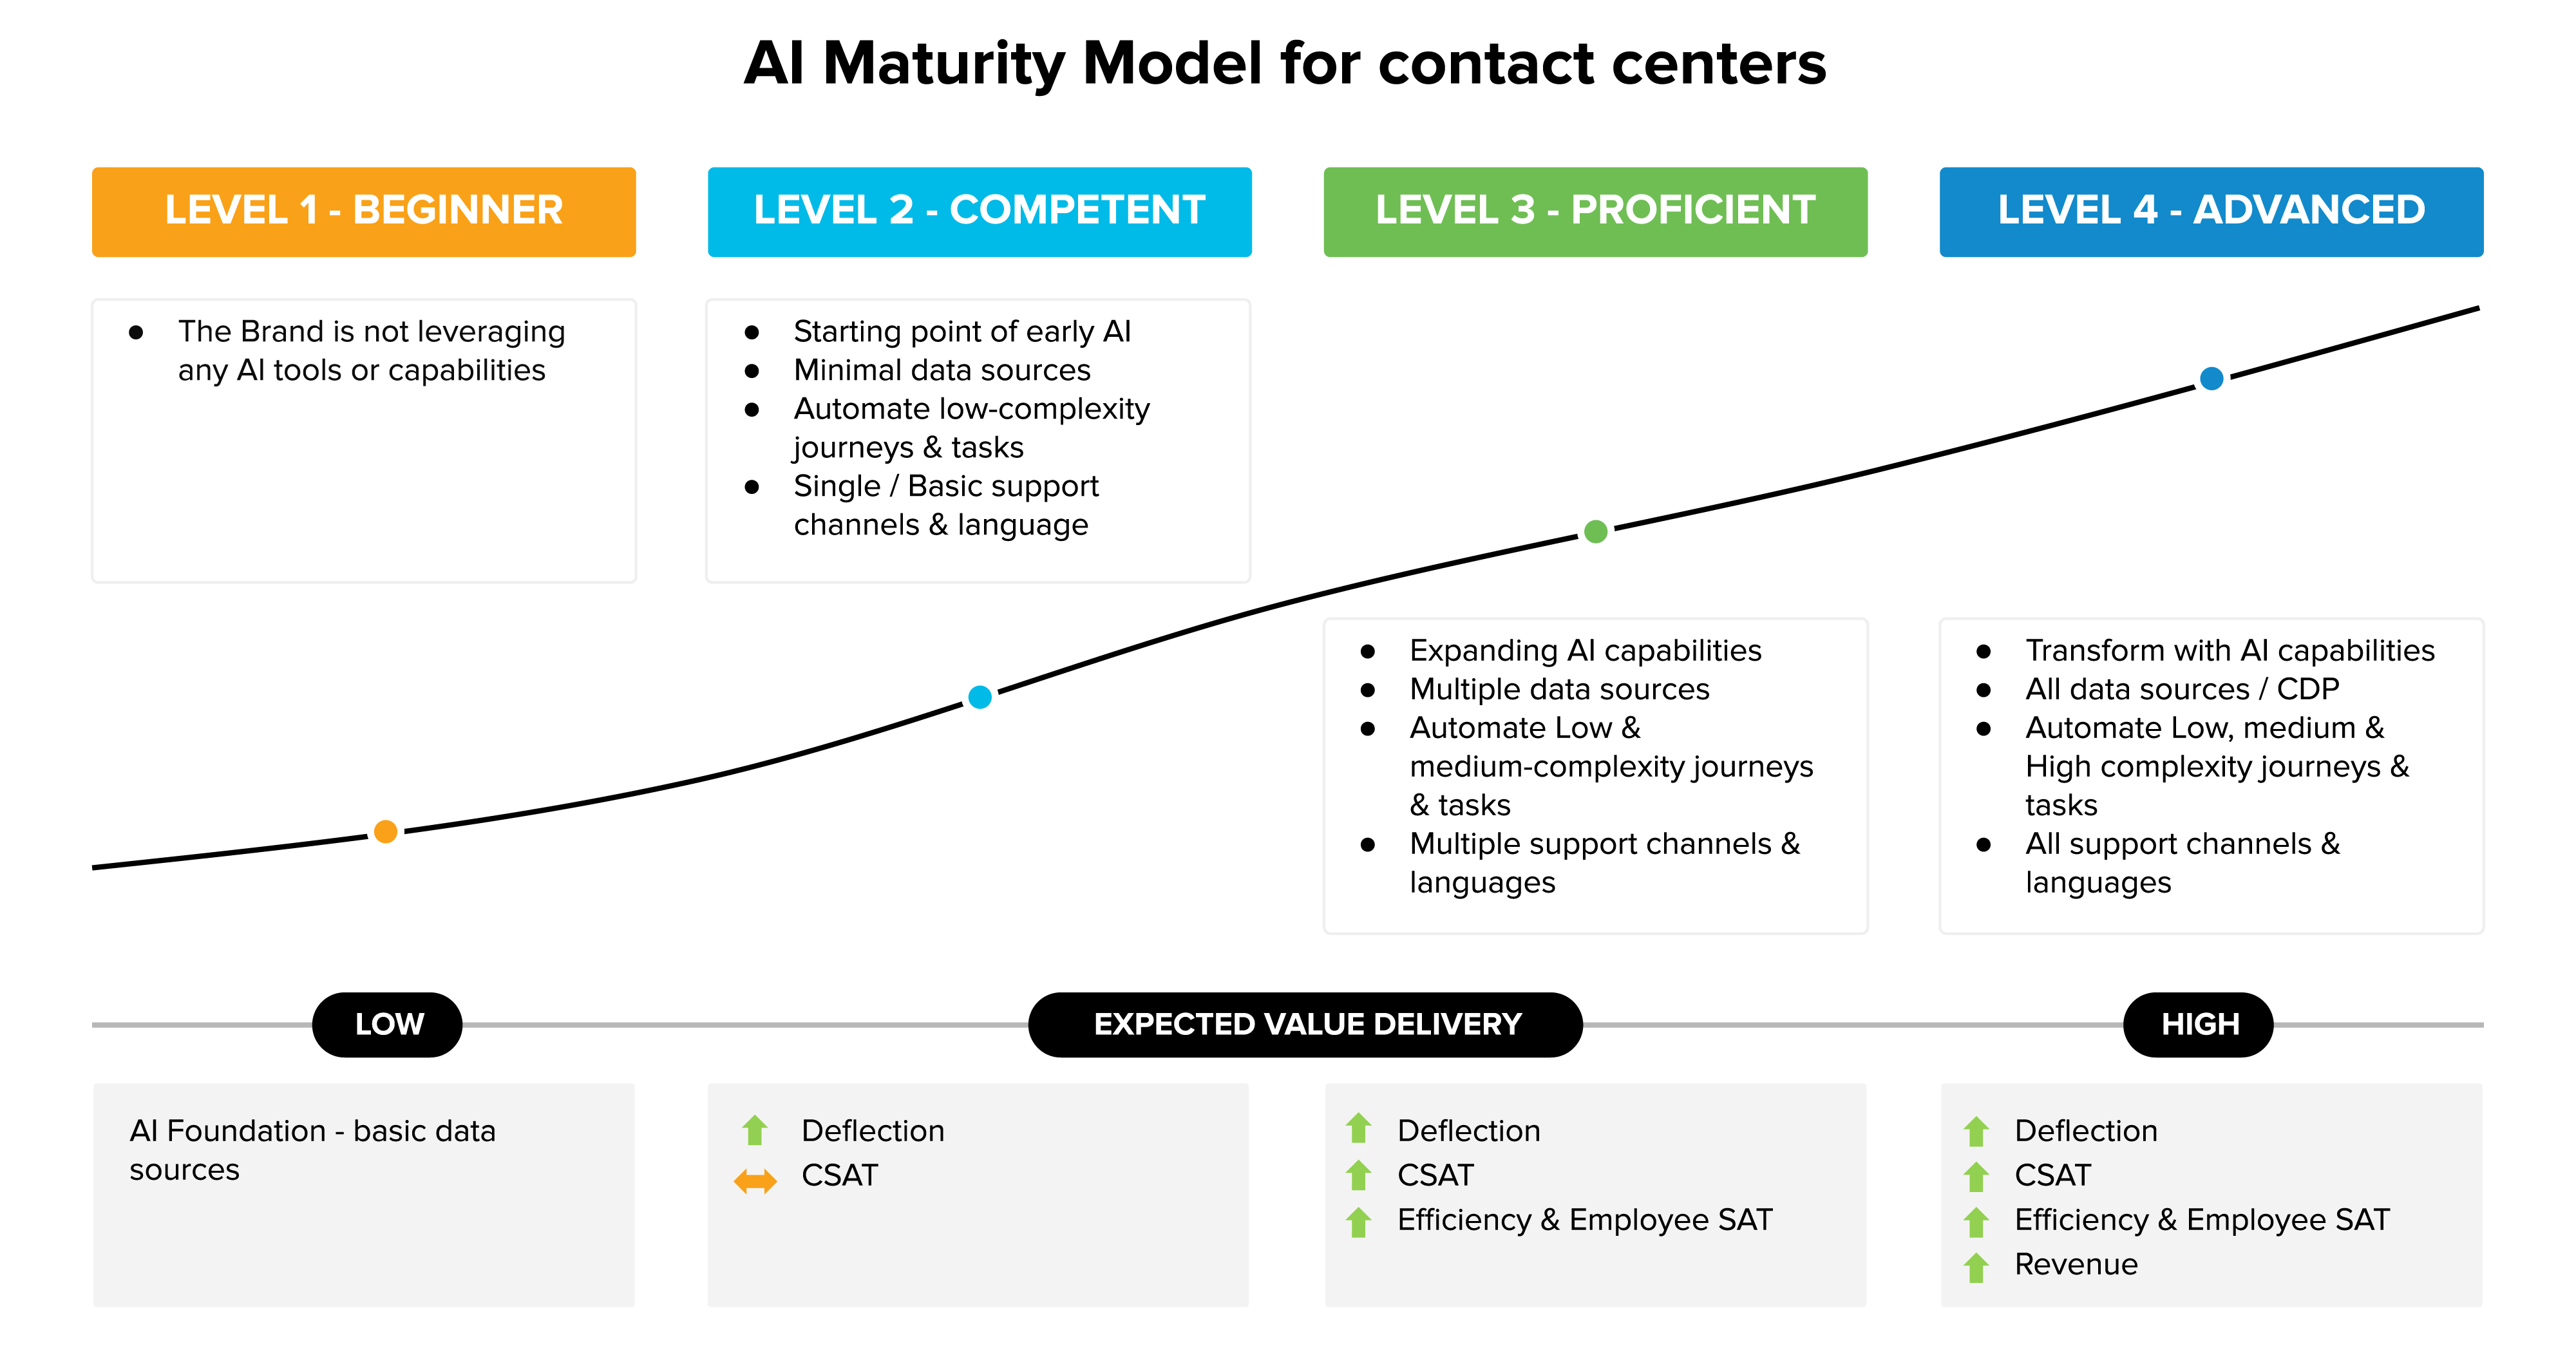 An image showing four stages of the Contact Center AI Maturity Model